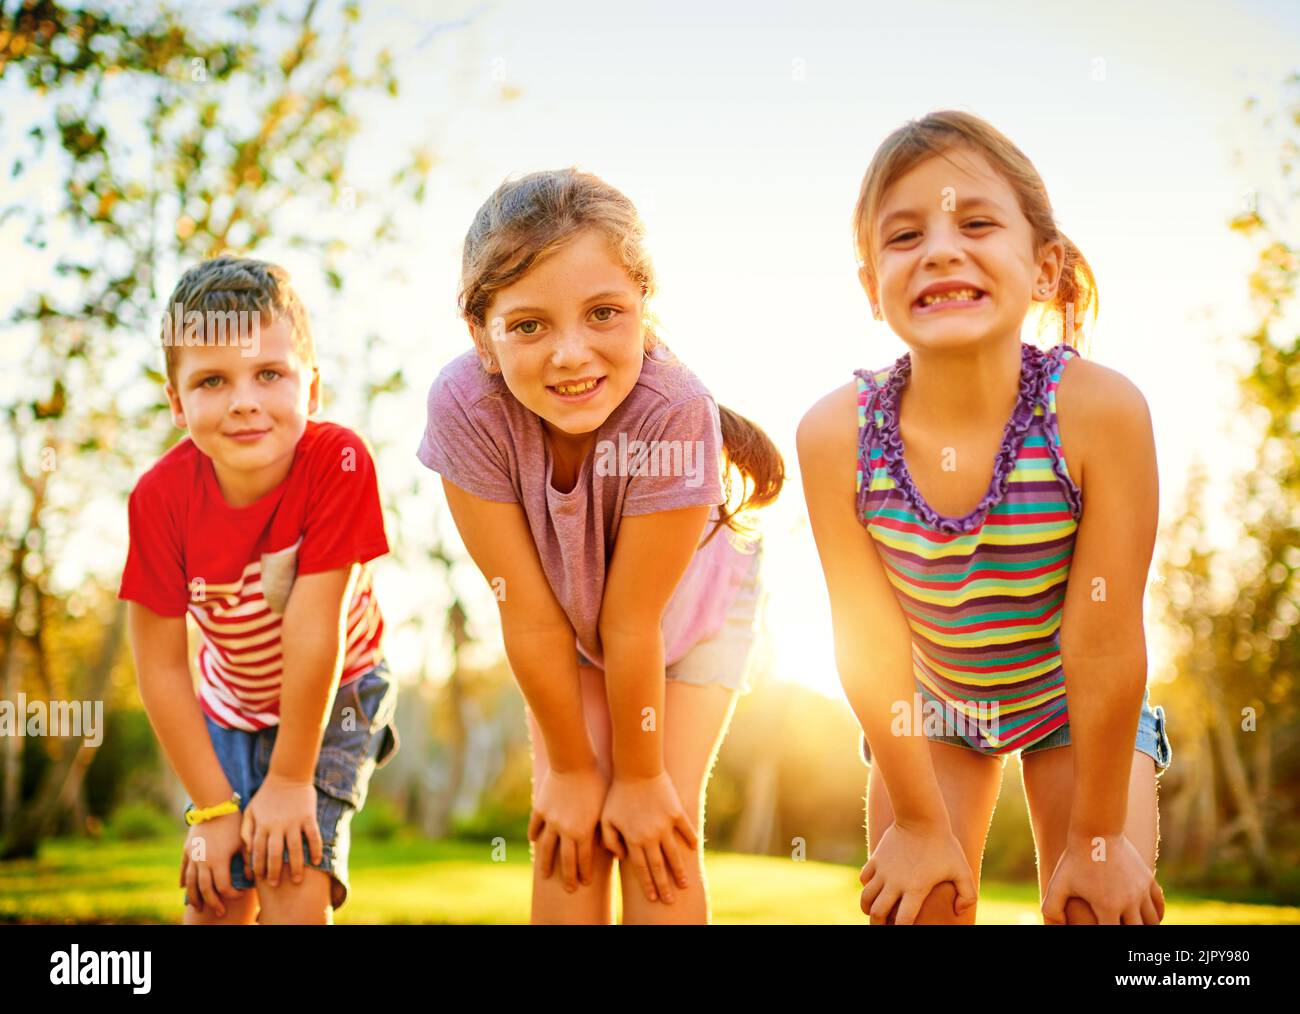 Having fun in the sun. Portrait of a group of little children playing together outdoors. Stock Photo